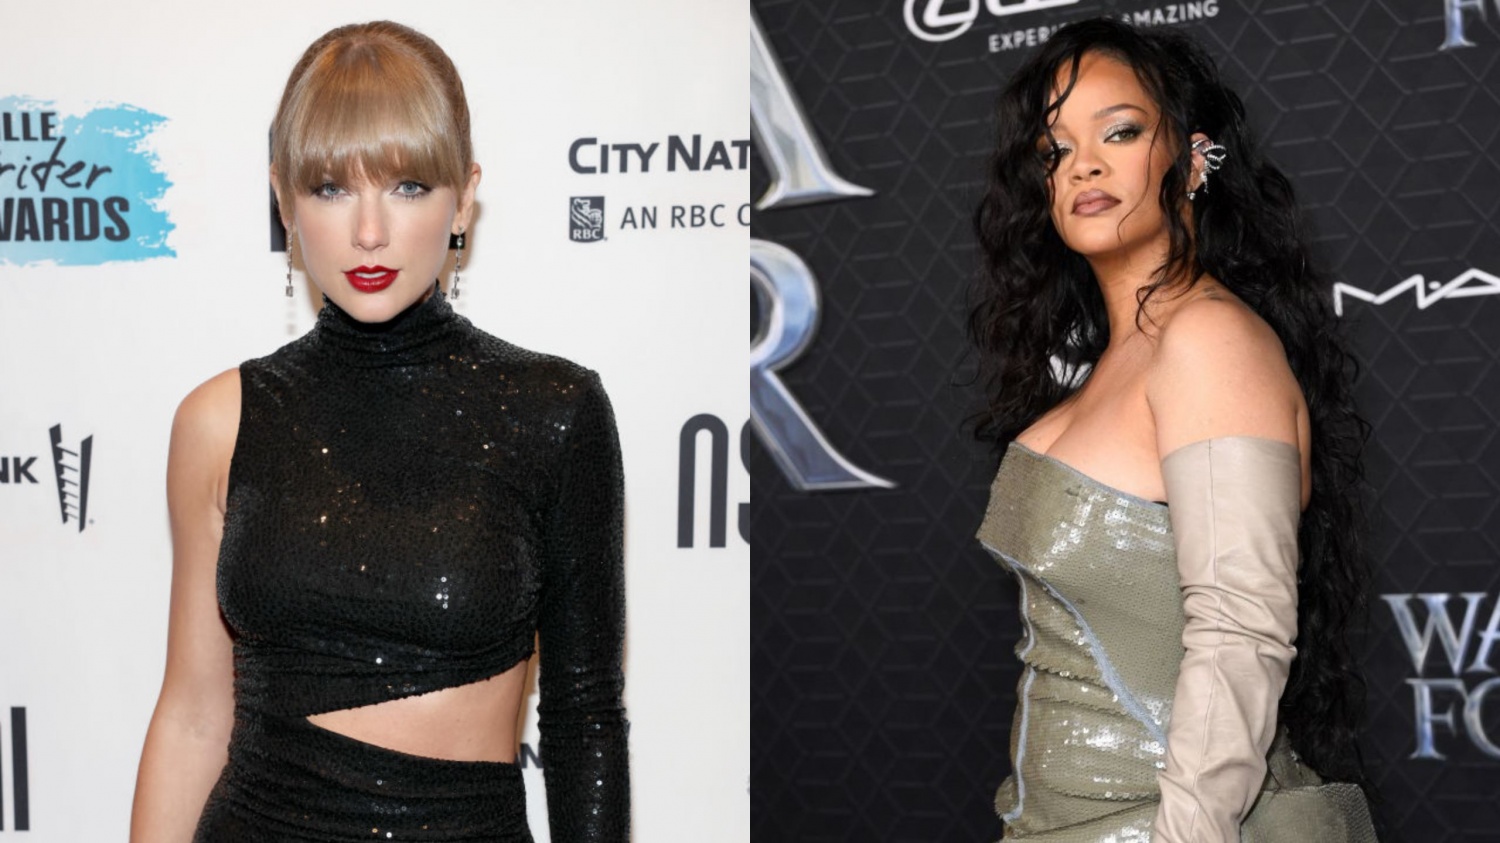 Taylor Swift vs Rihanna Net Worth 2022: Who's Wealthier Between the Top Two Billboard 100 Artists? | Music Times